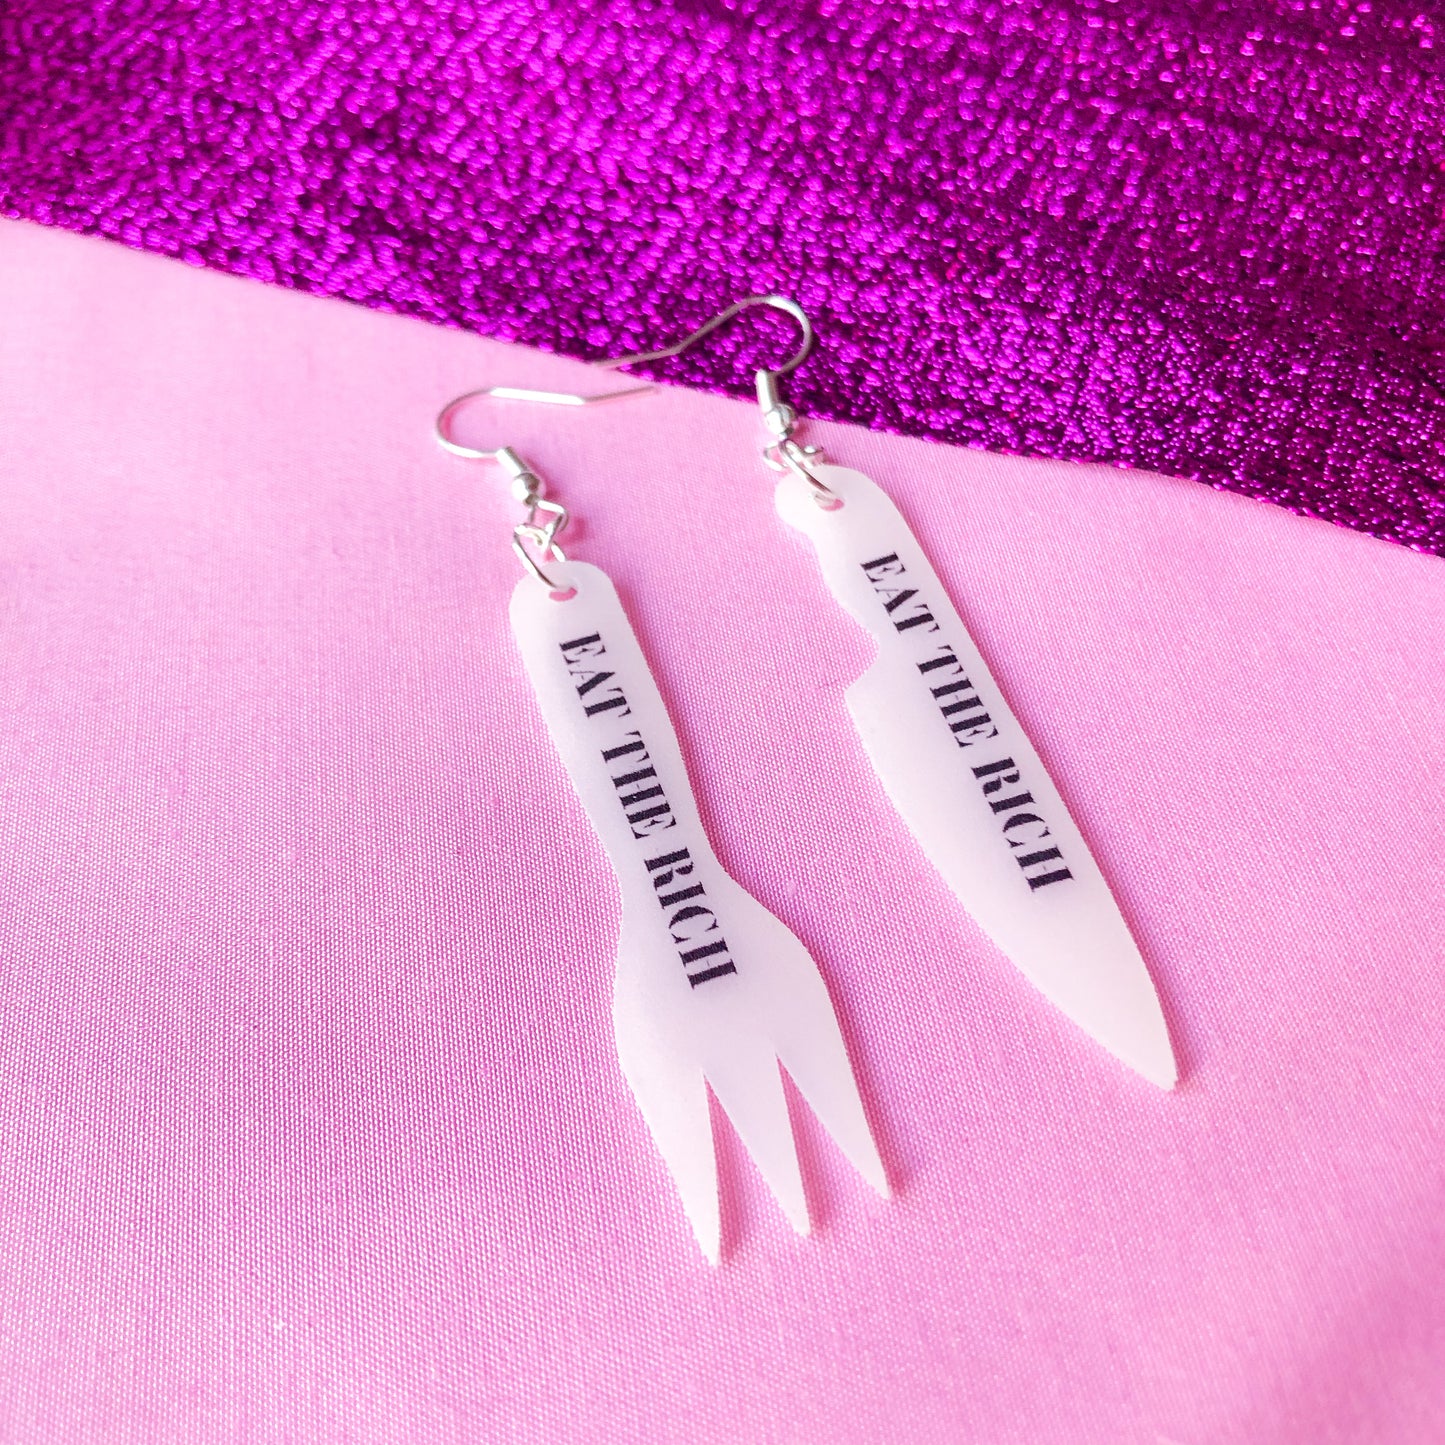 EAT THE RICH, knife and fork earrings